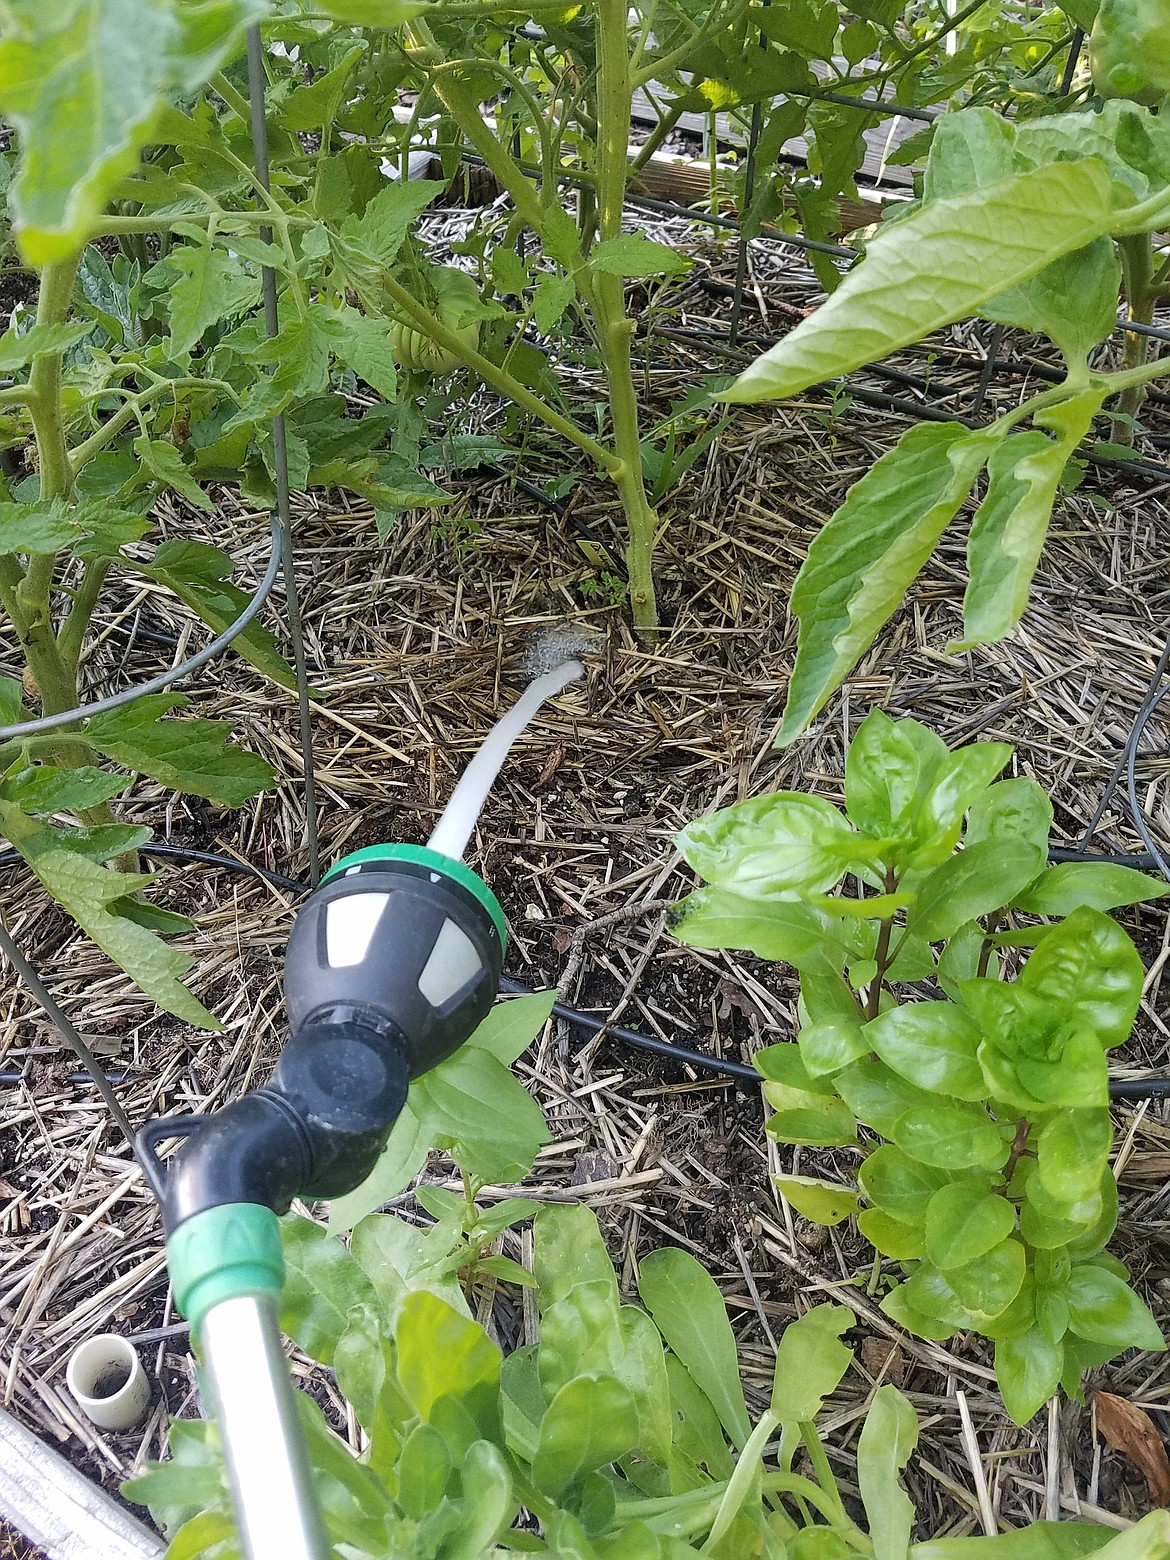 Water vegetables at the base of the plant where it will easily reach the roots. Also, note the straw mulch, which keeps the soil cool and retains moisture.